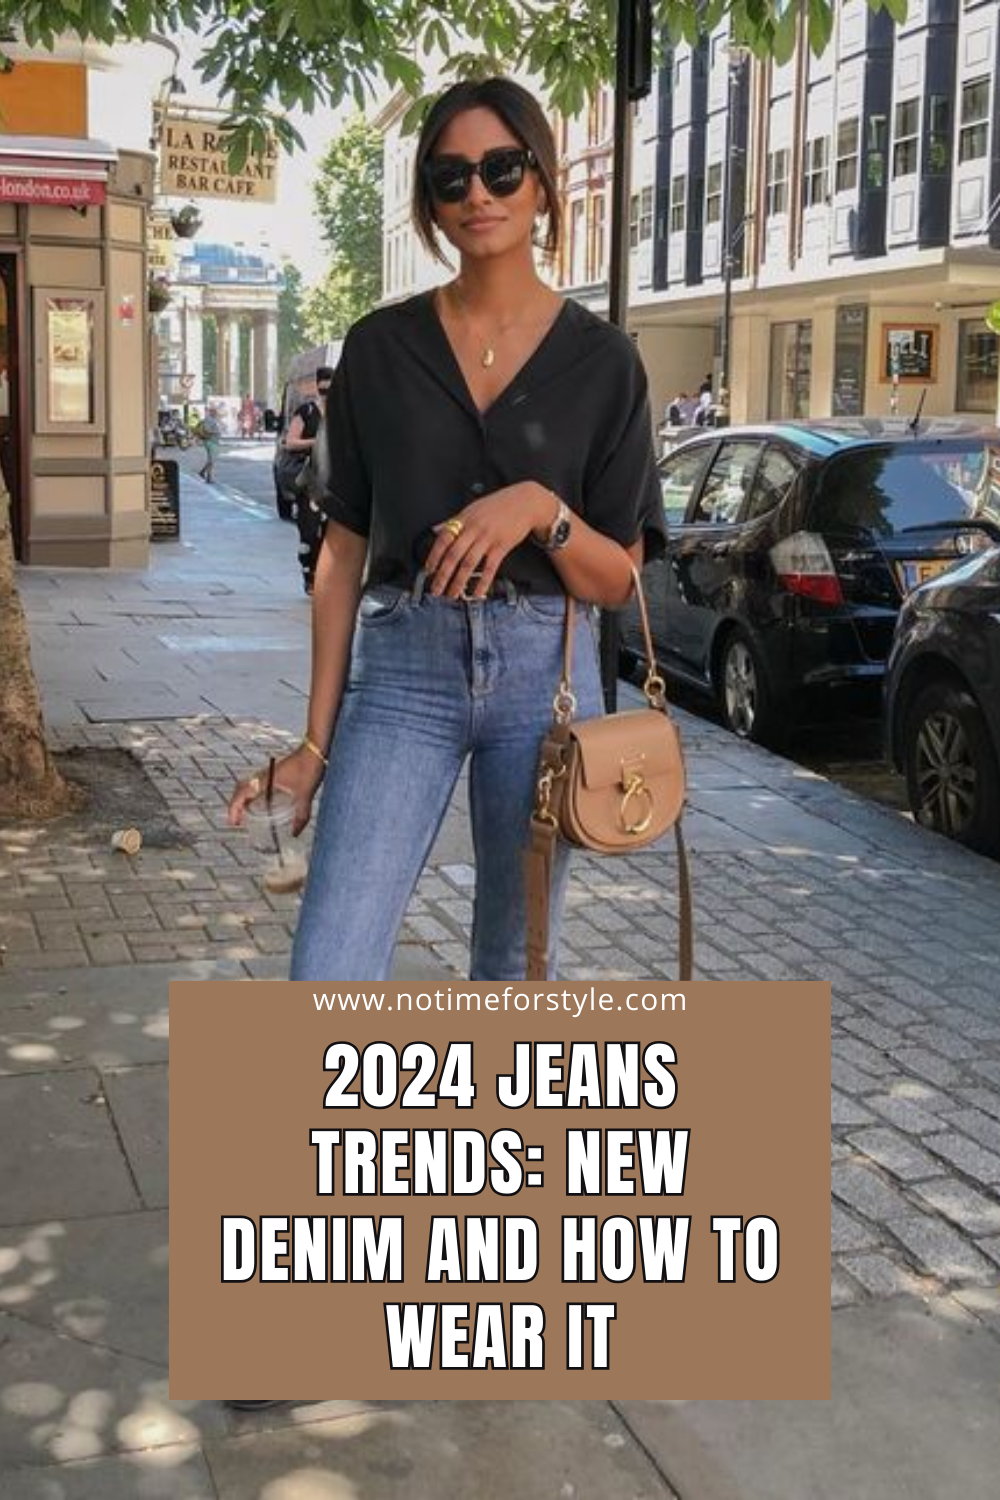 Chic Jeans — What Happened to the Iconic Chic Jeans Brand?